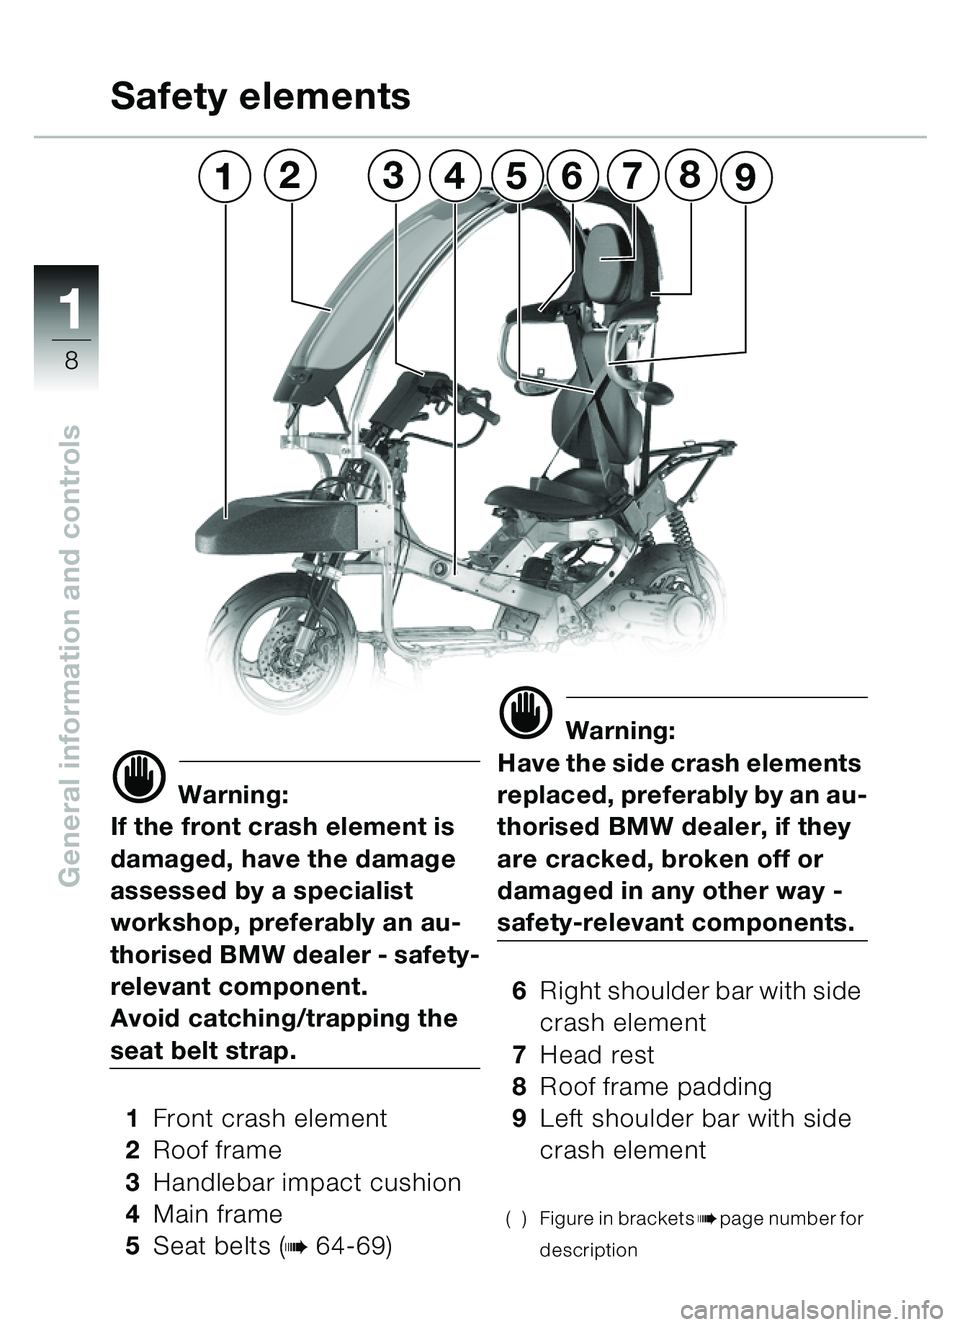 BMW MOTORRAD C1 2000  Riders Manual (in English) 11
8
General information and controls
d Warning:
If the front crash element is 
damaged, have the damage 
assessed by a specialist 
workshop, preferably an au-
thorised BMW dealer - safety-
relevant c